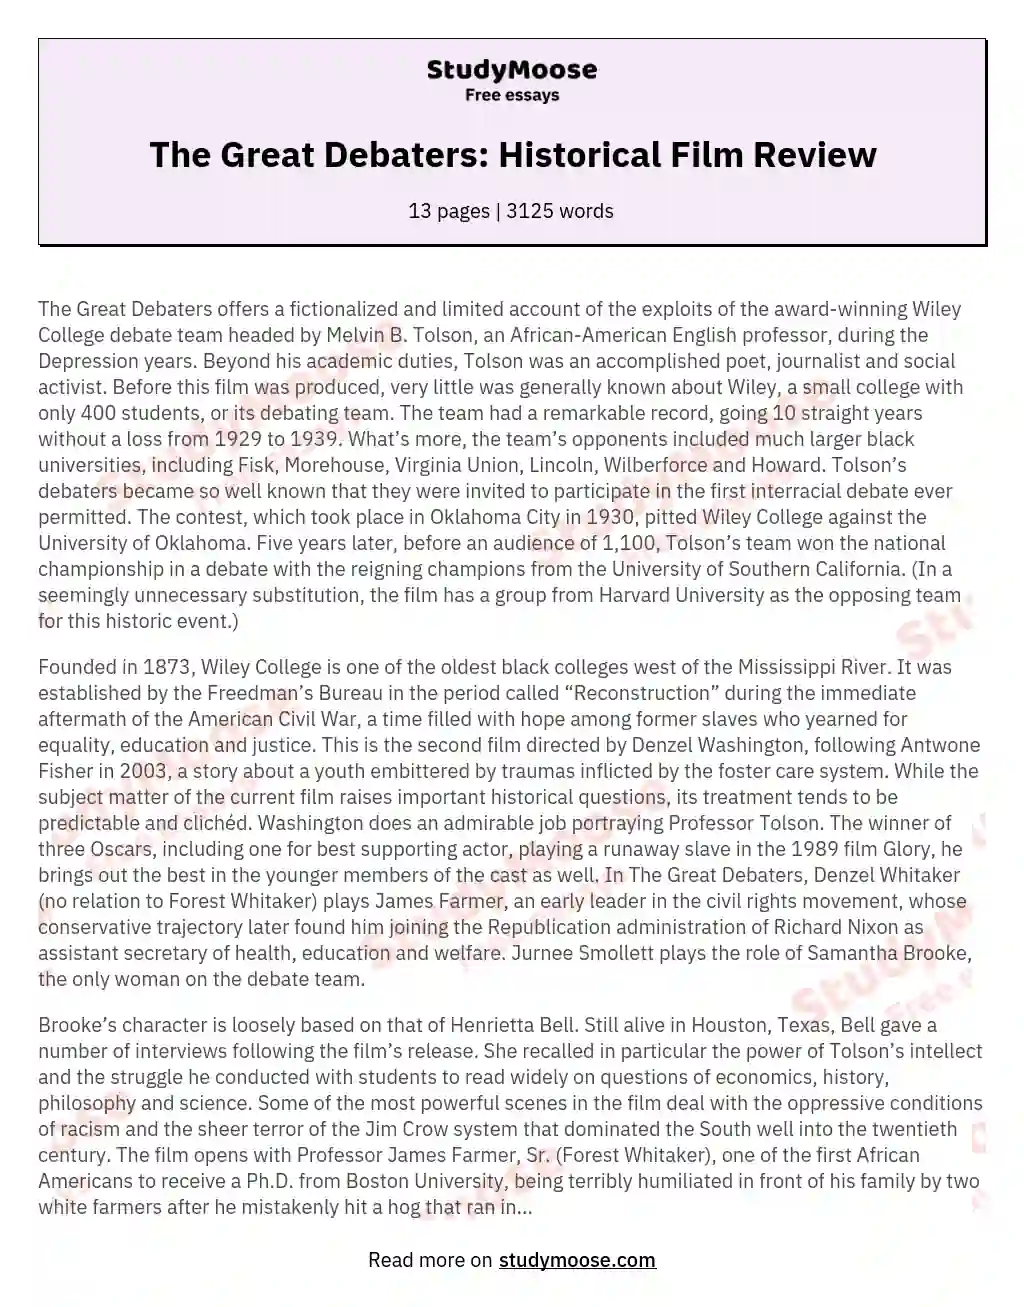 The Great Debaters: Historical Film Review